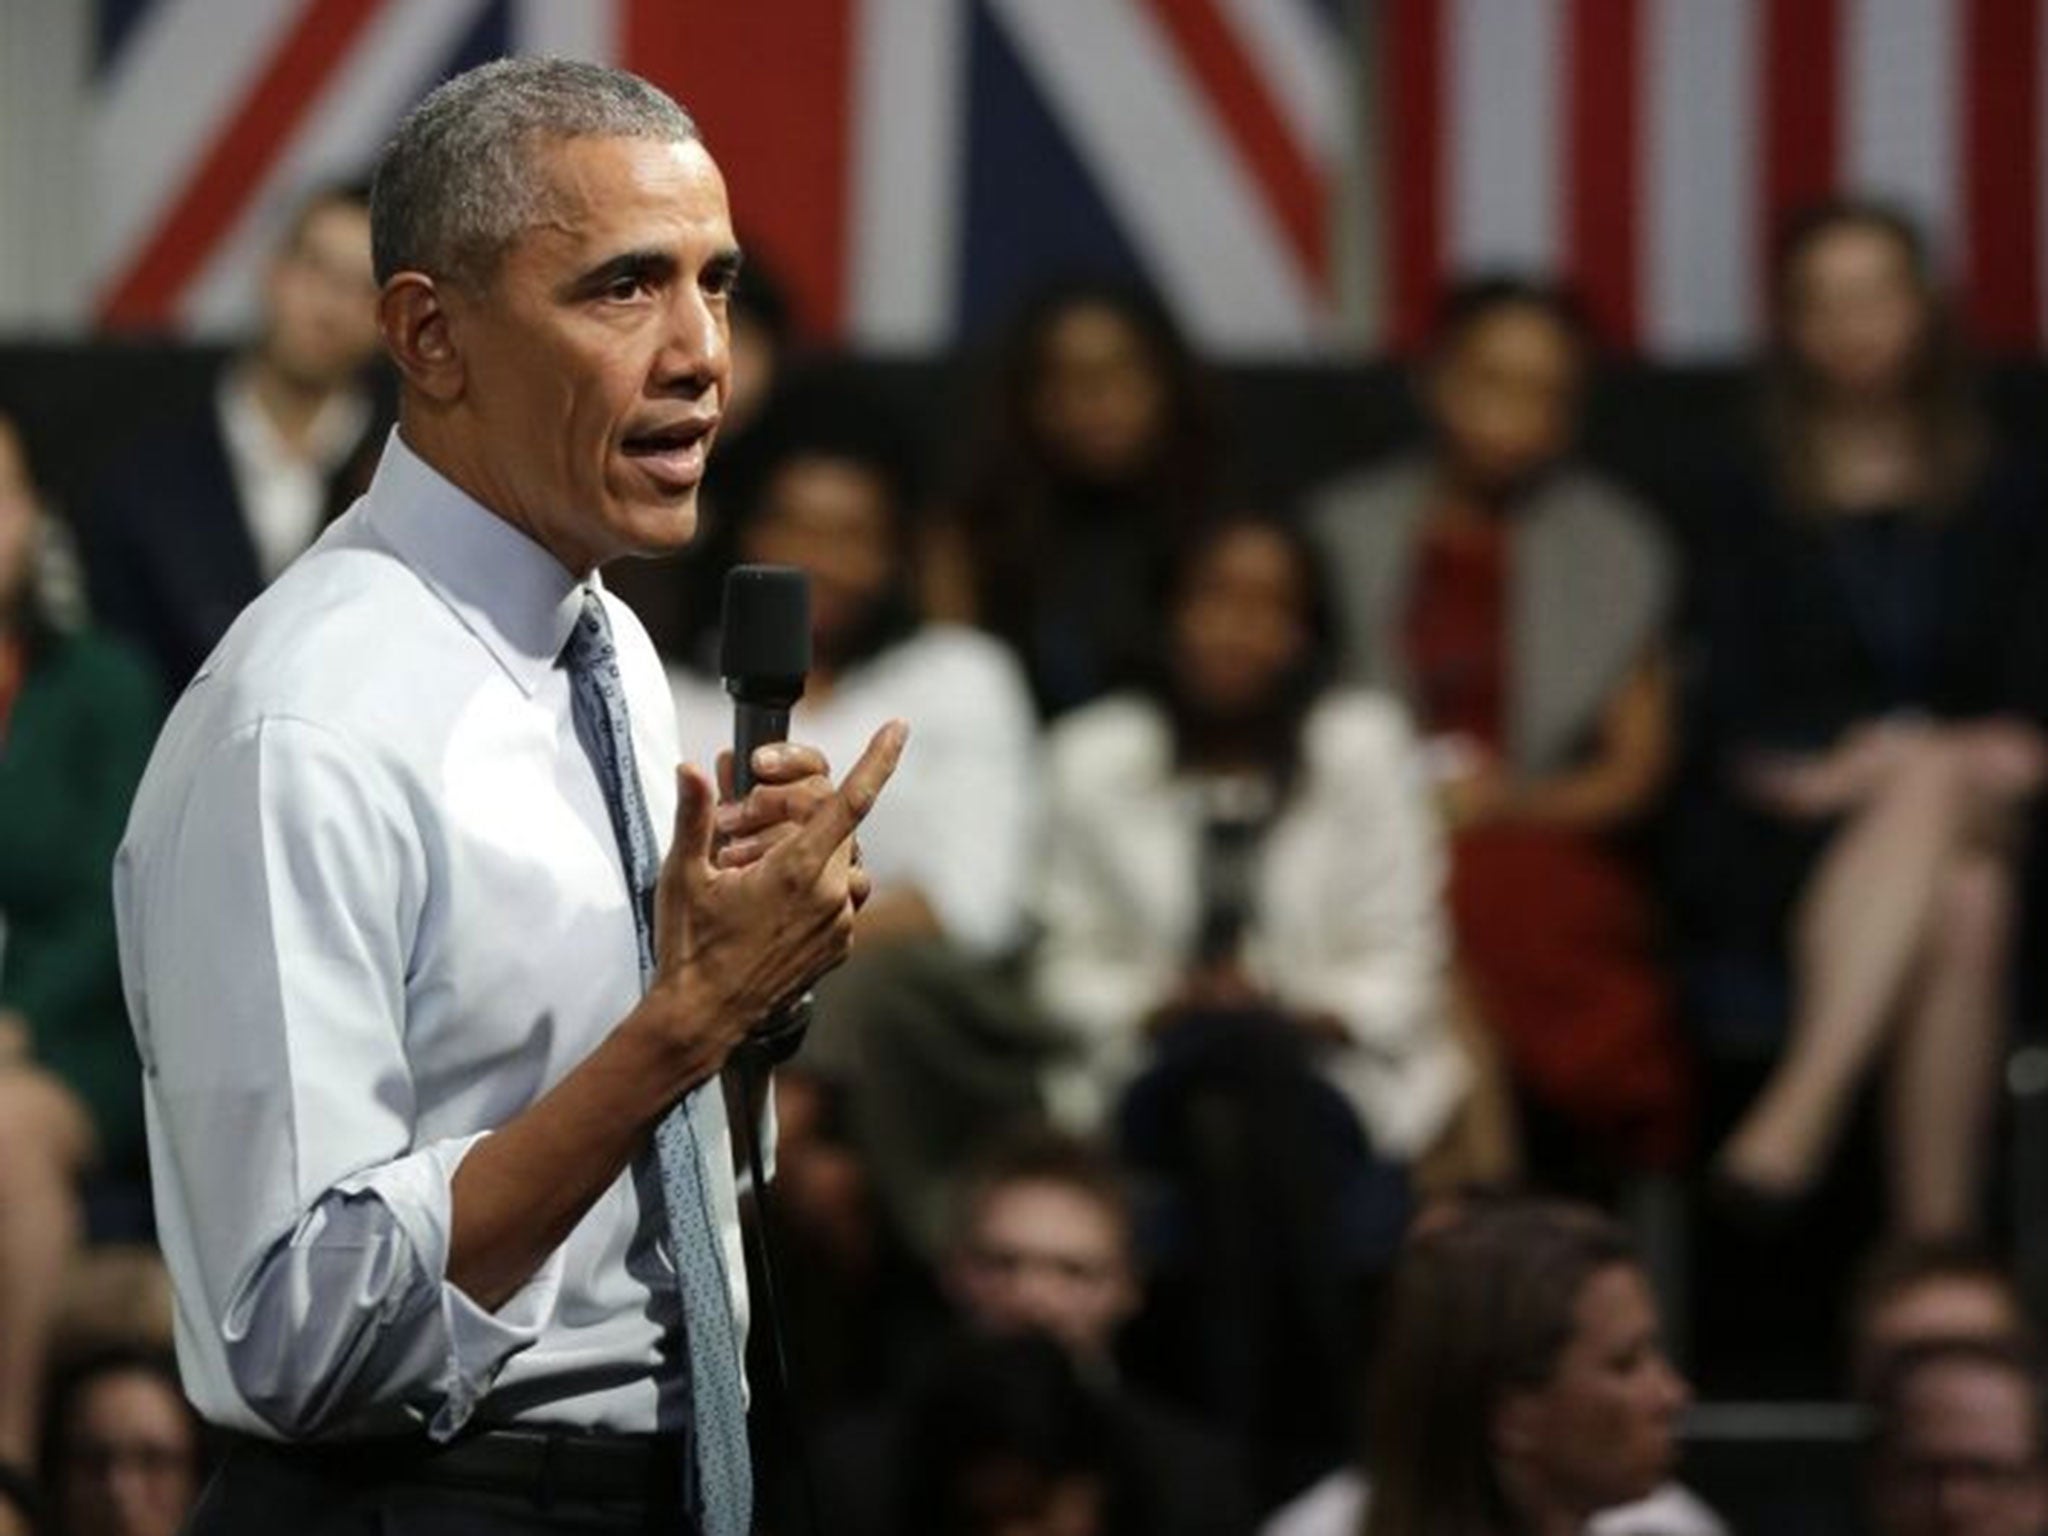 Obama is advocating for the UK to stay in the EU